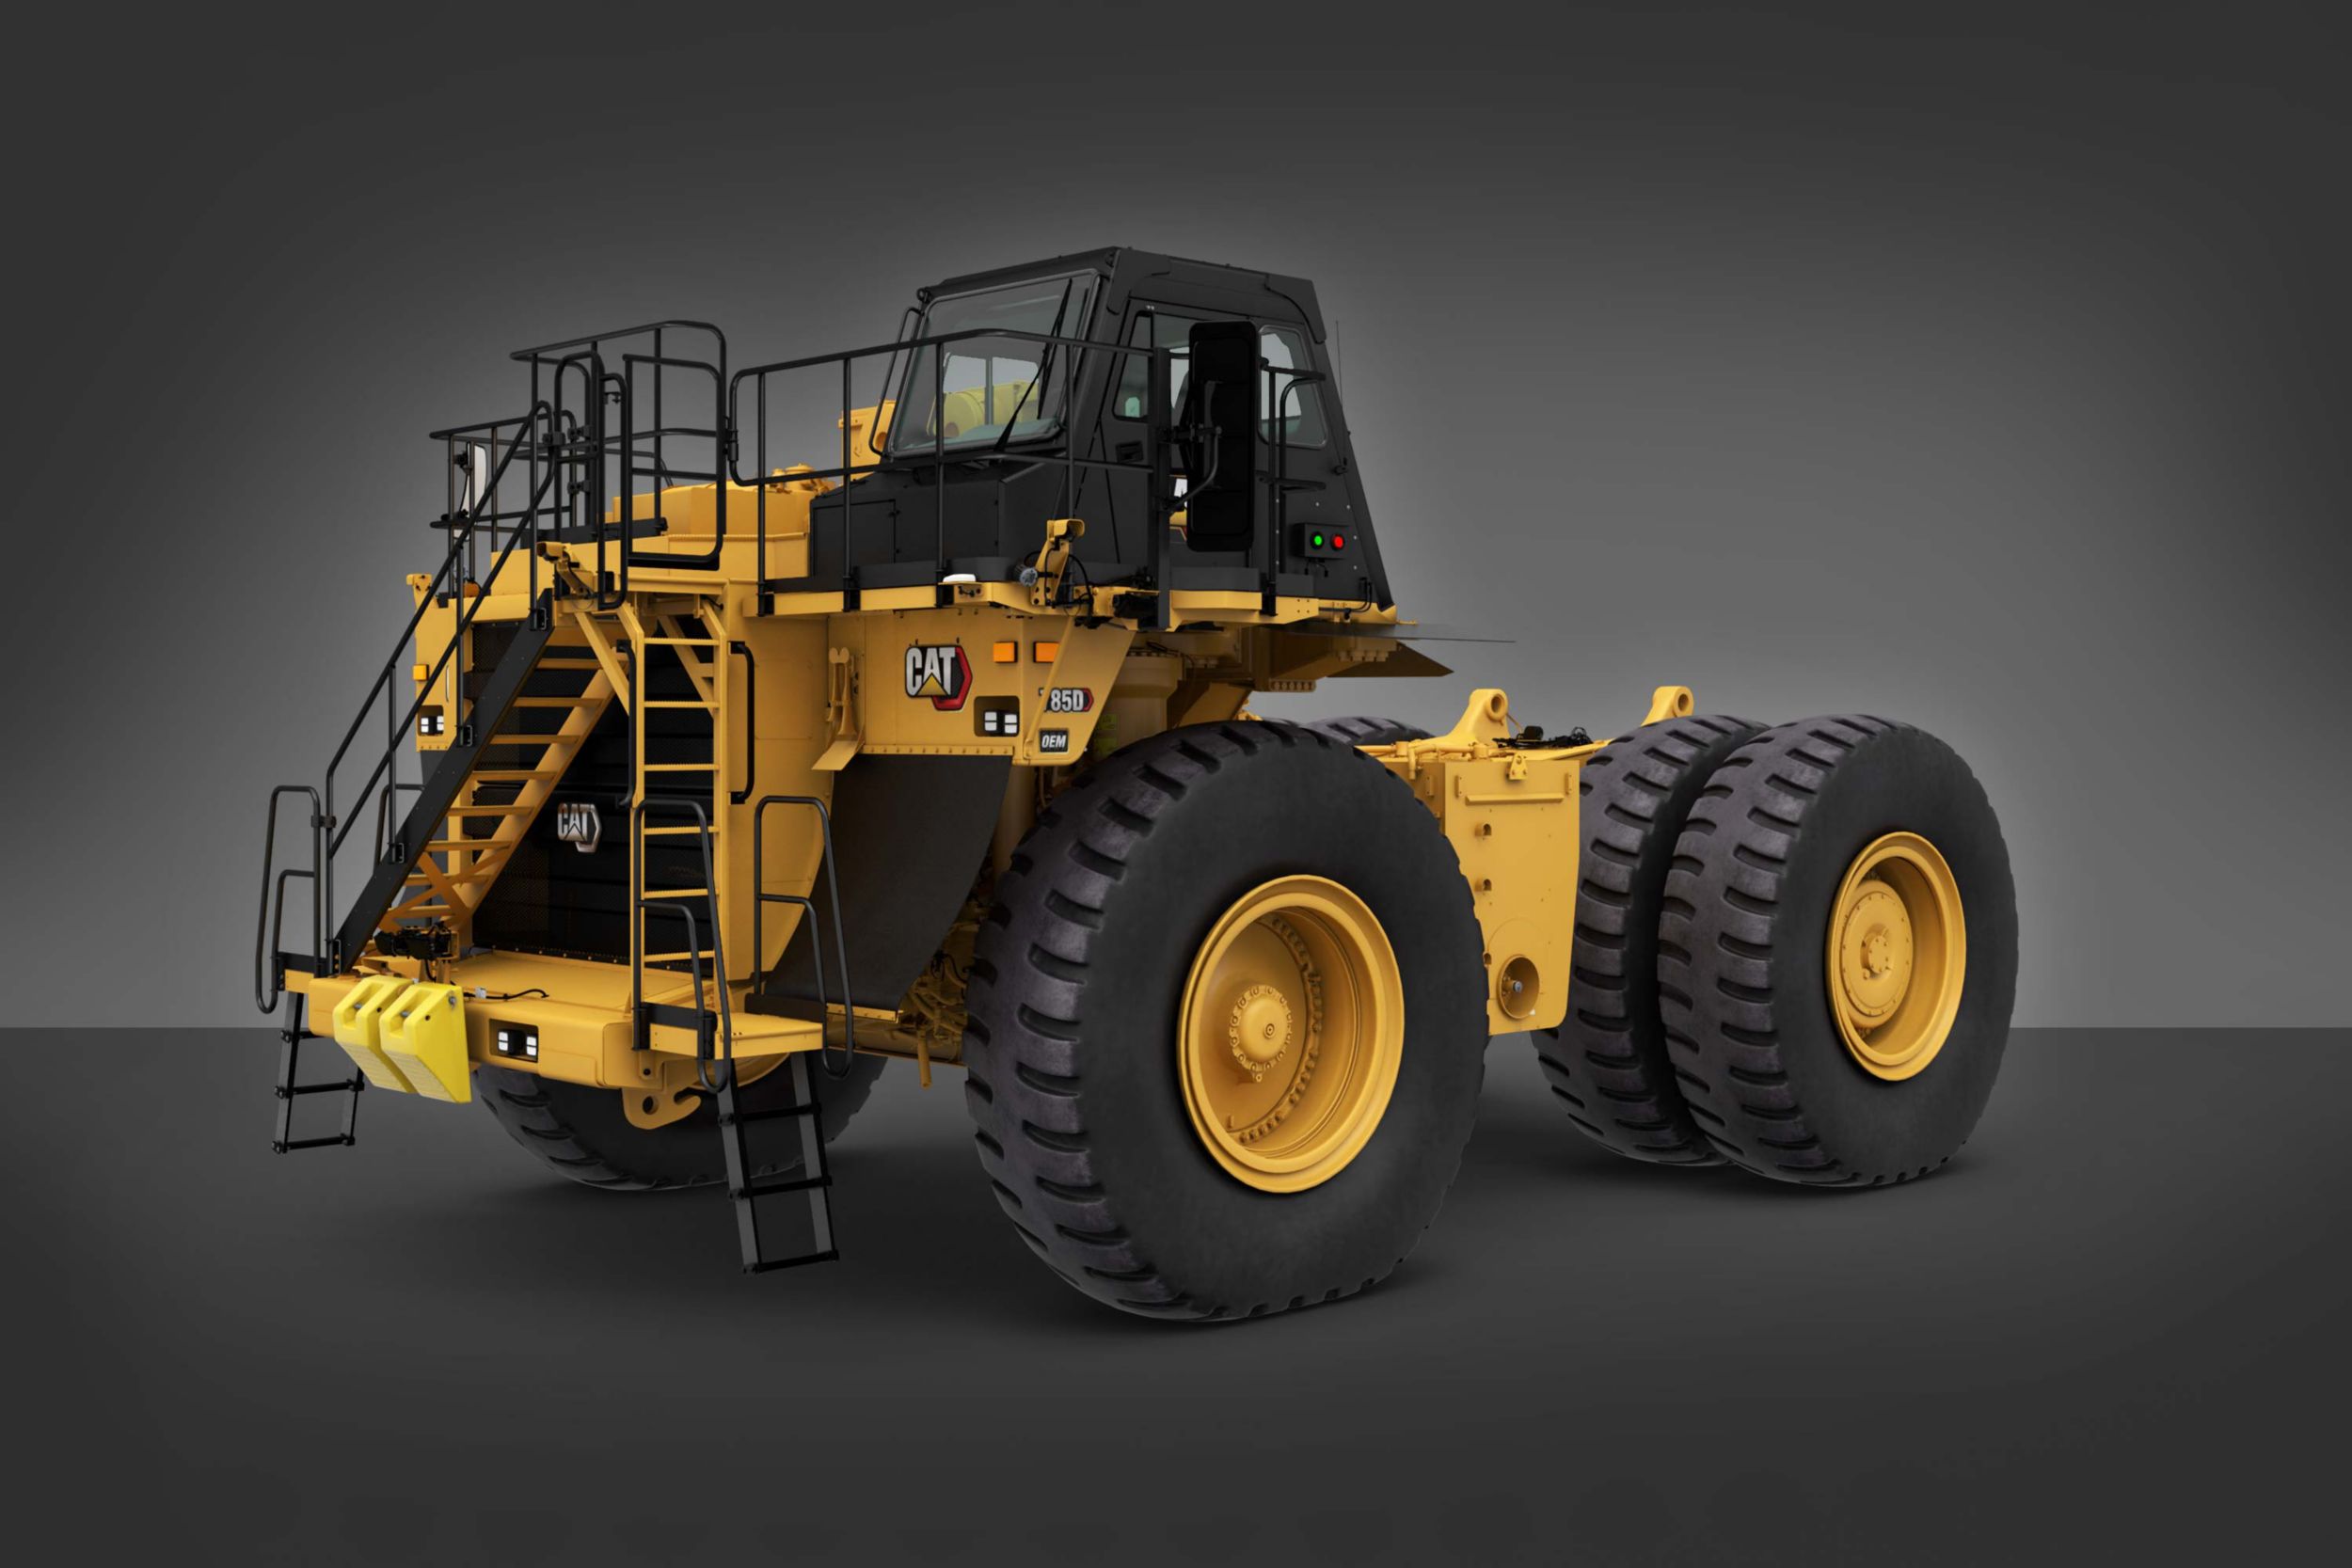 The 785D bare chassis comes equipped with a higher Tractor ROPS certification ratings needed for specialty machines including water trucks, tow trucks, and fuel and lube trucks.